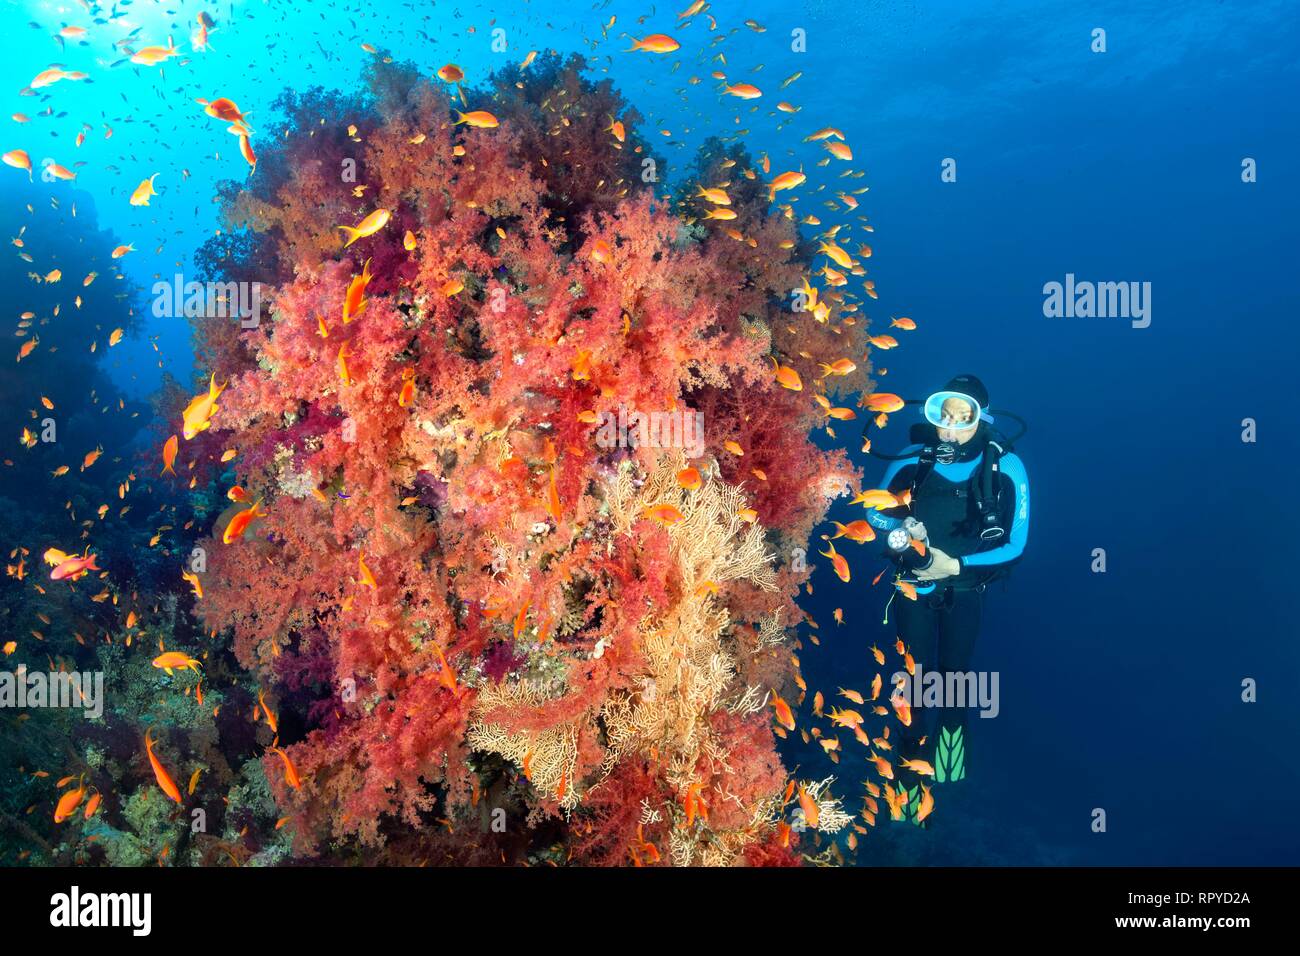 Diver looking at large coral block with dense vegetation from Klunzinger's Soft Corals (Dendronephthya klunzingeri) with Stock Photo